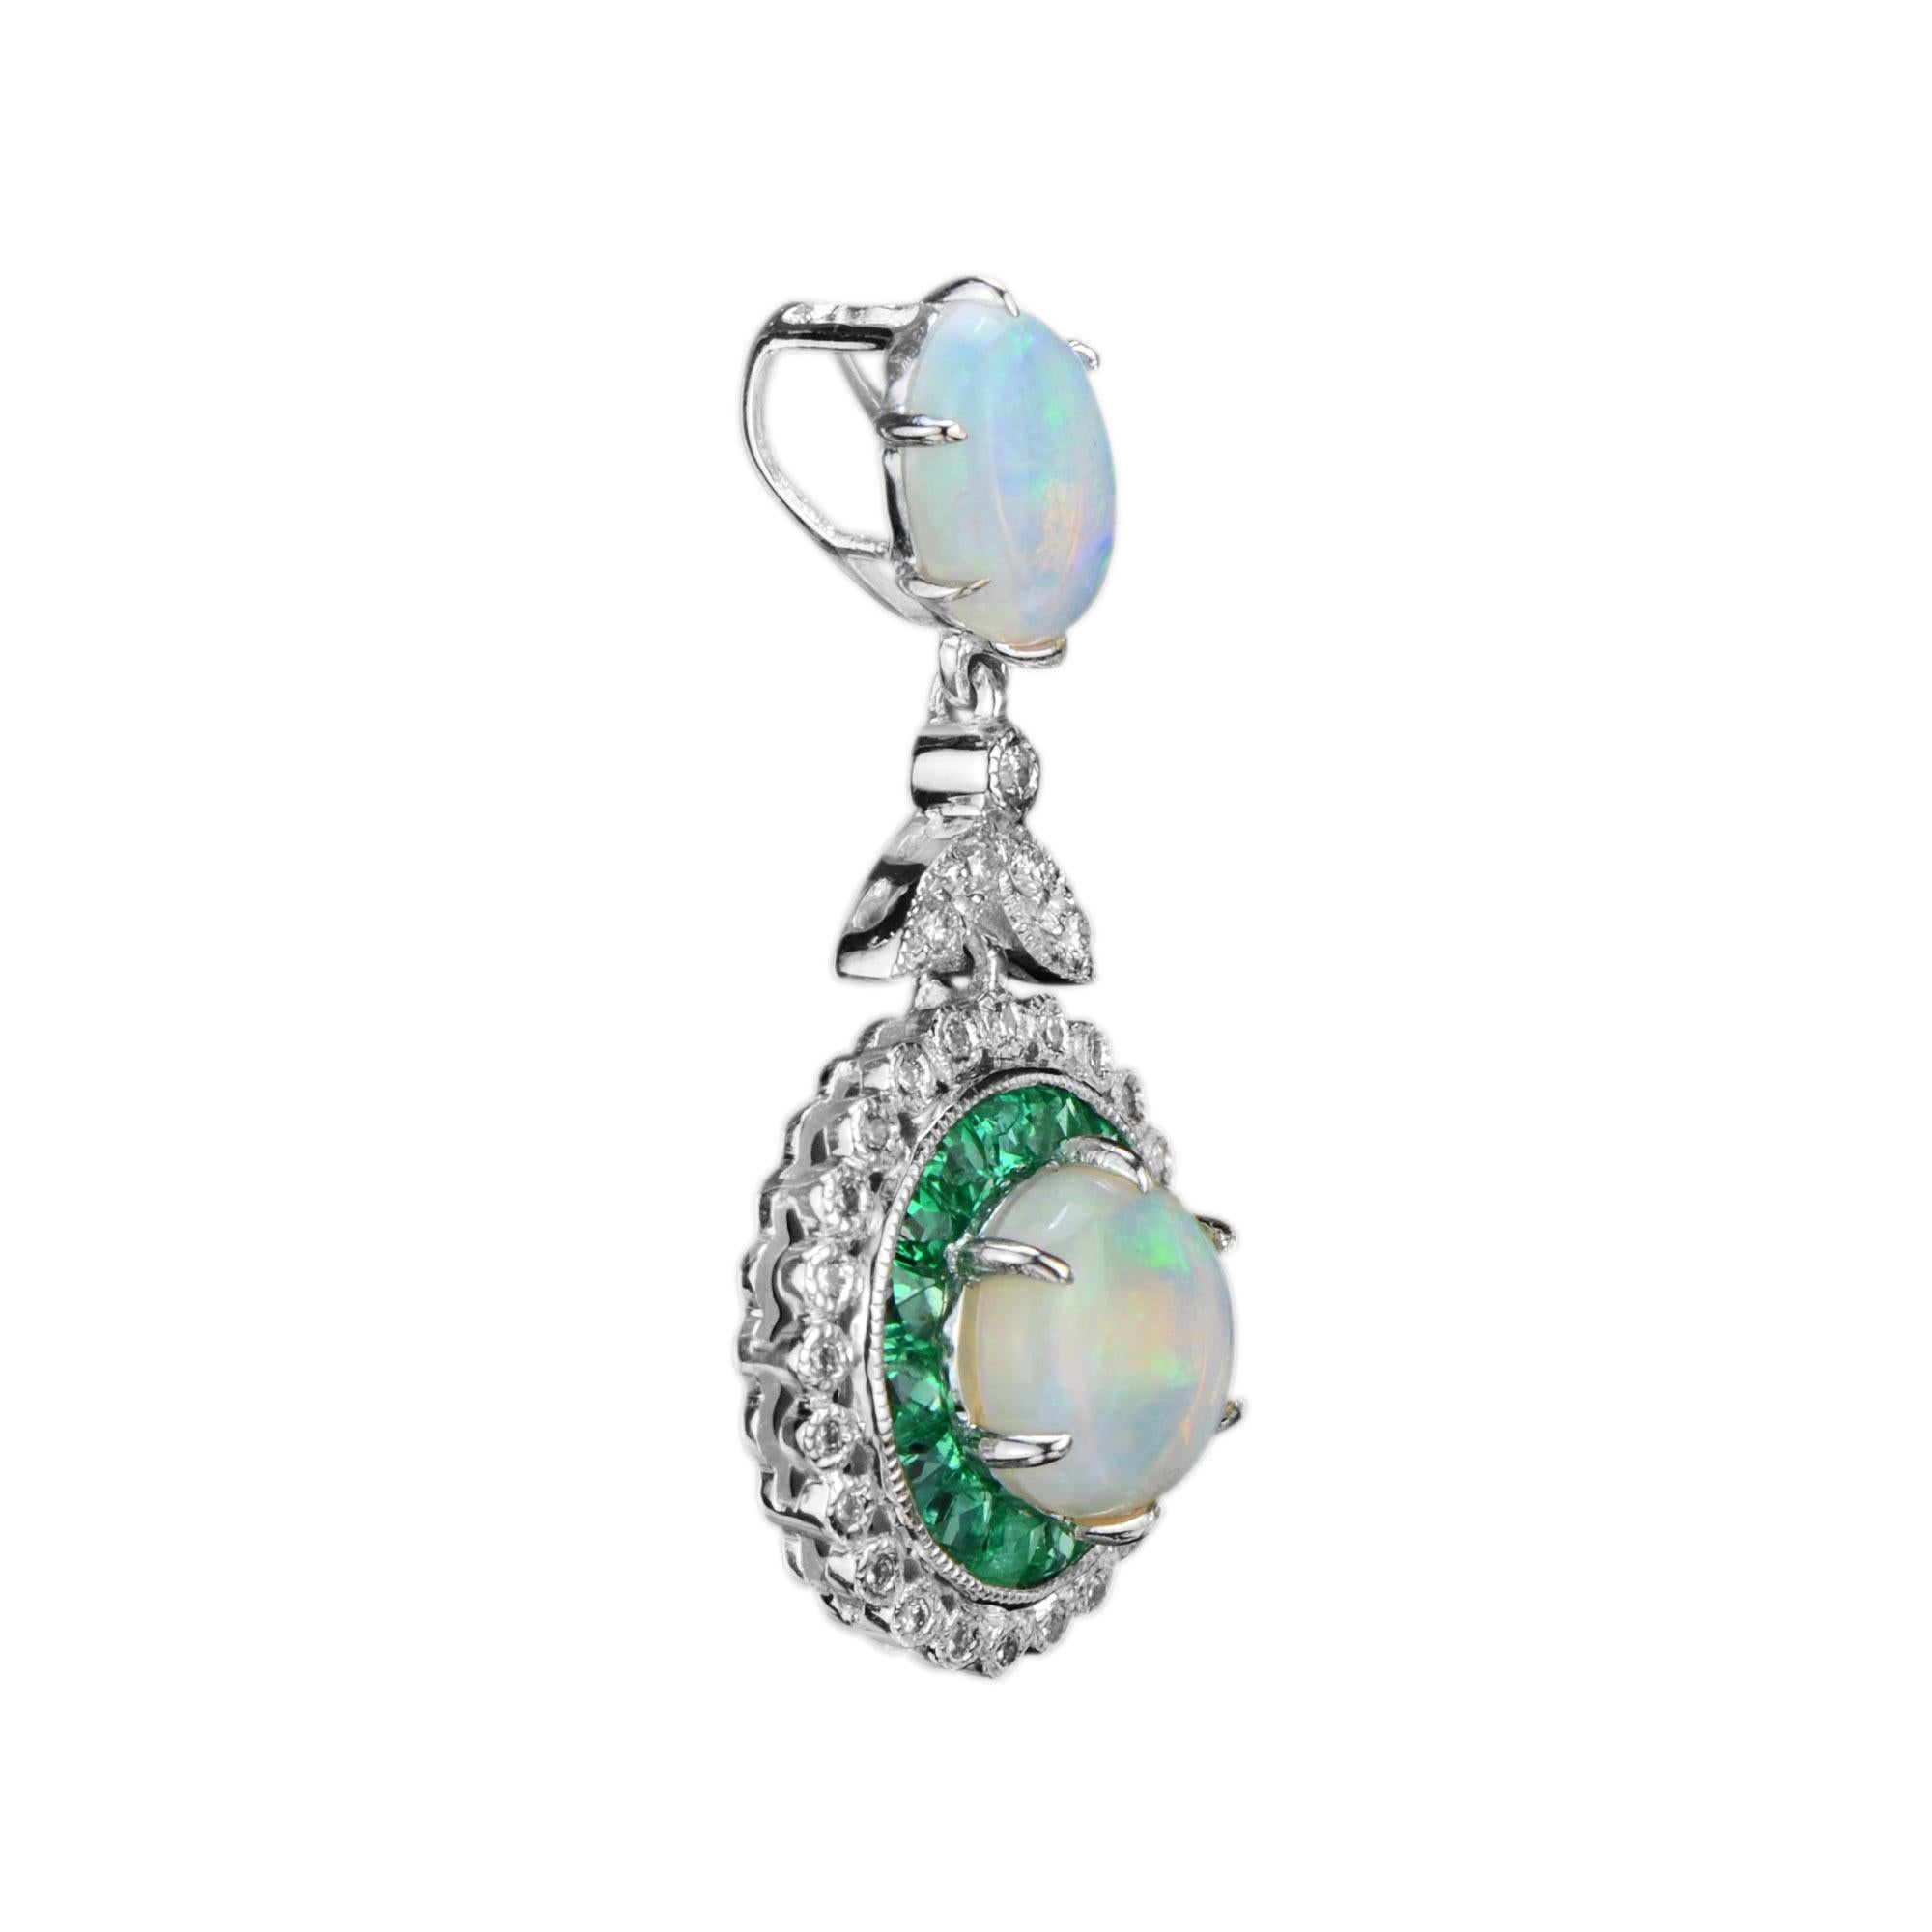 An Art Deco style opal with emerald and diamond halo pendant made with 18K white gold. The center opal is a 0.80 carat. It is surrounded by French cut emeralds that are cut by hand to fit seamlessly together. The emeralds are further enhanced by a